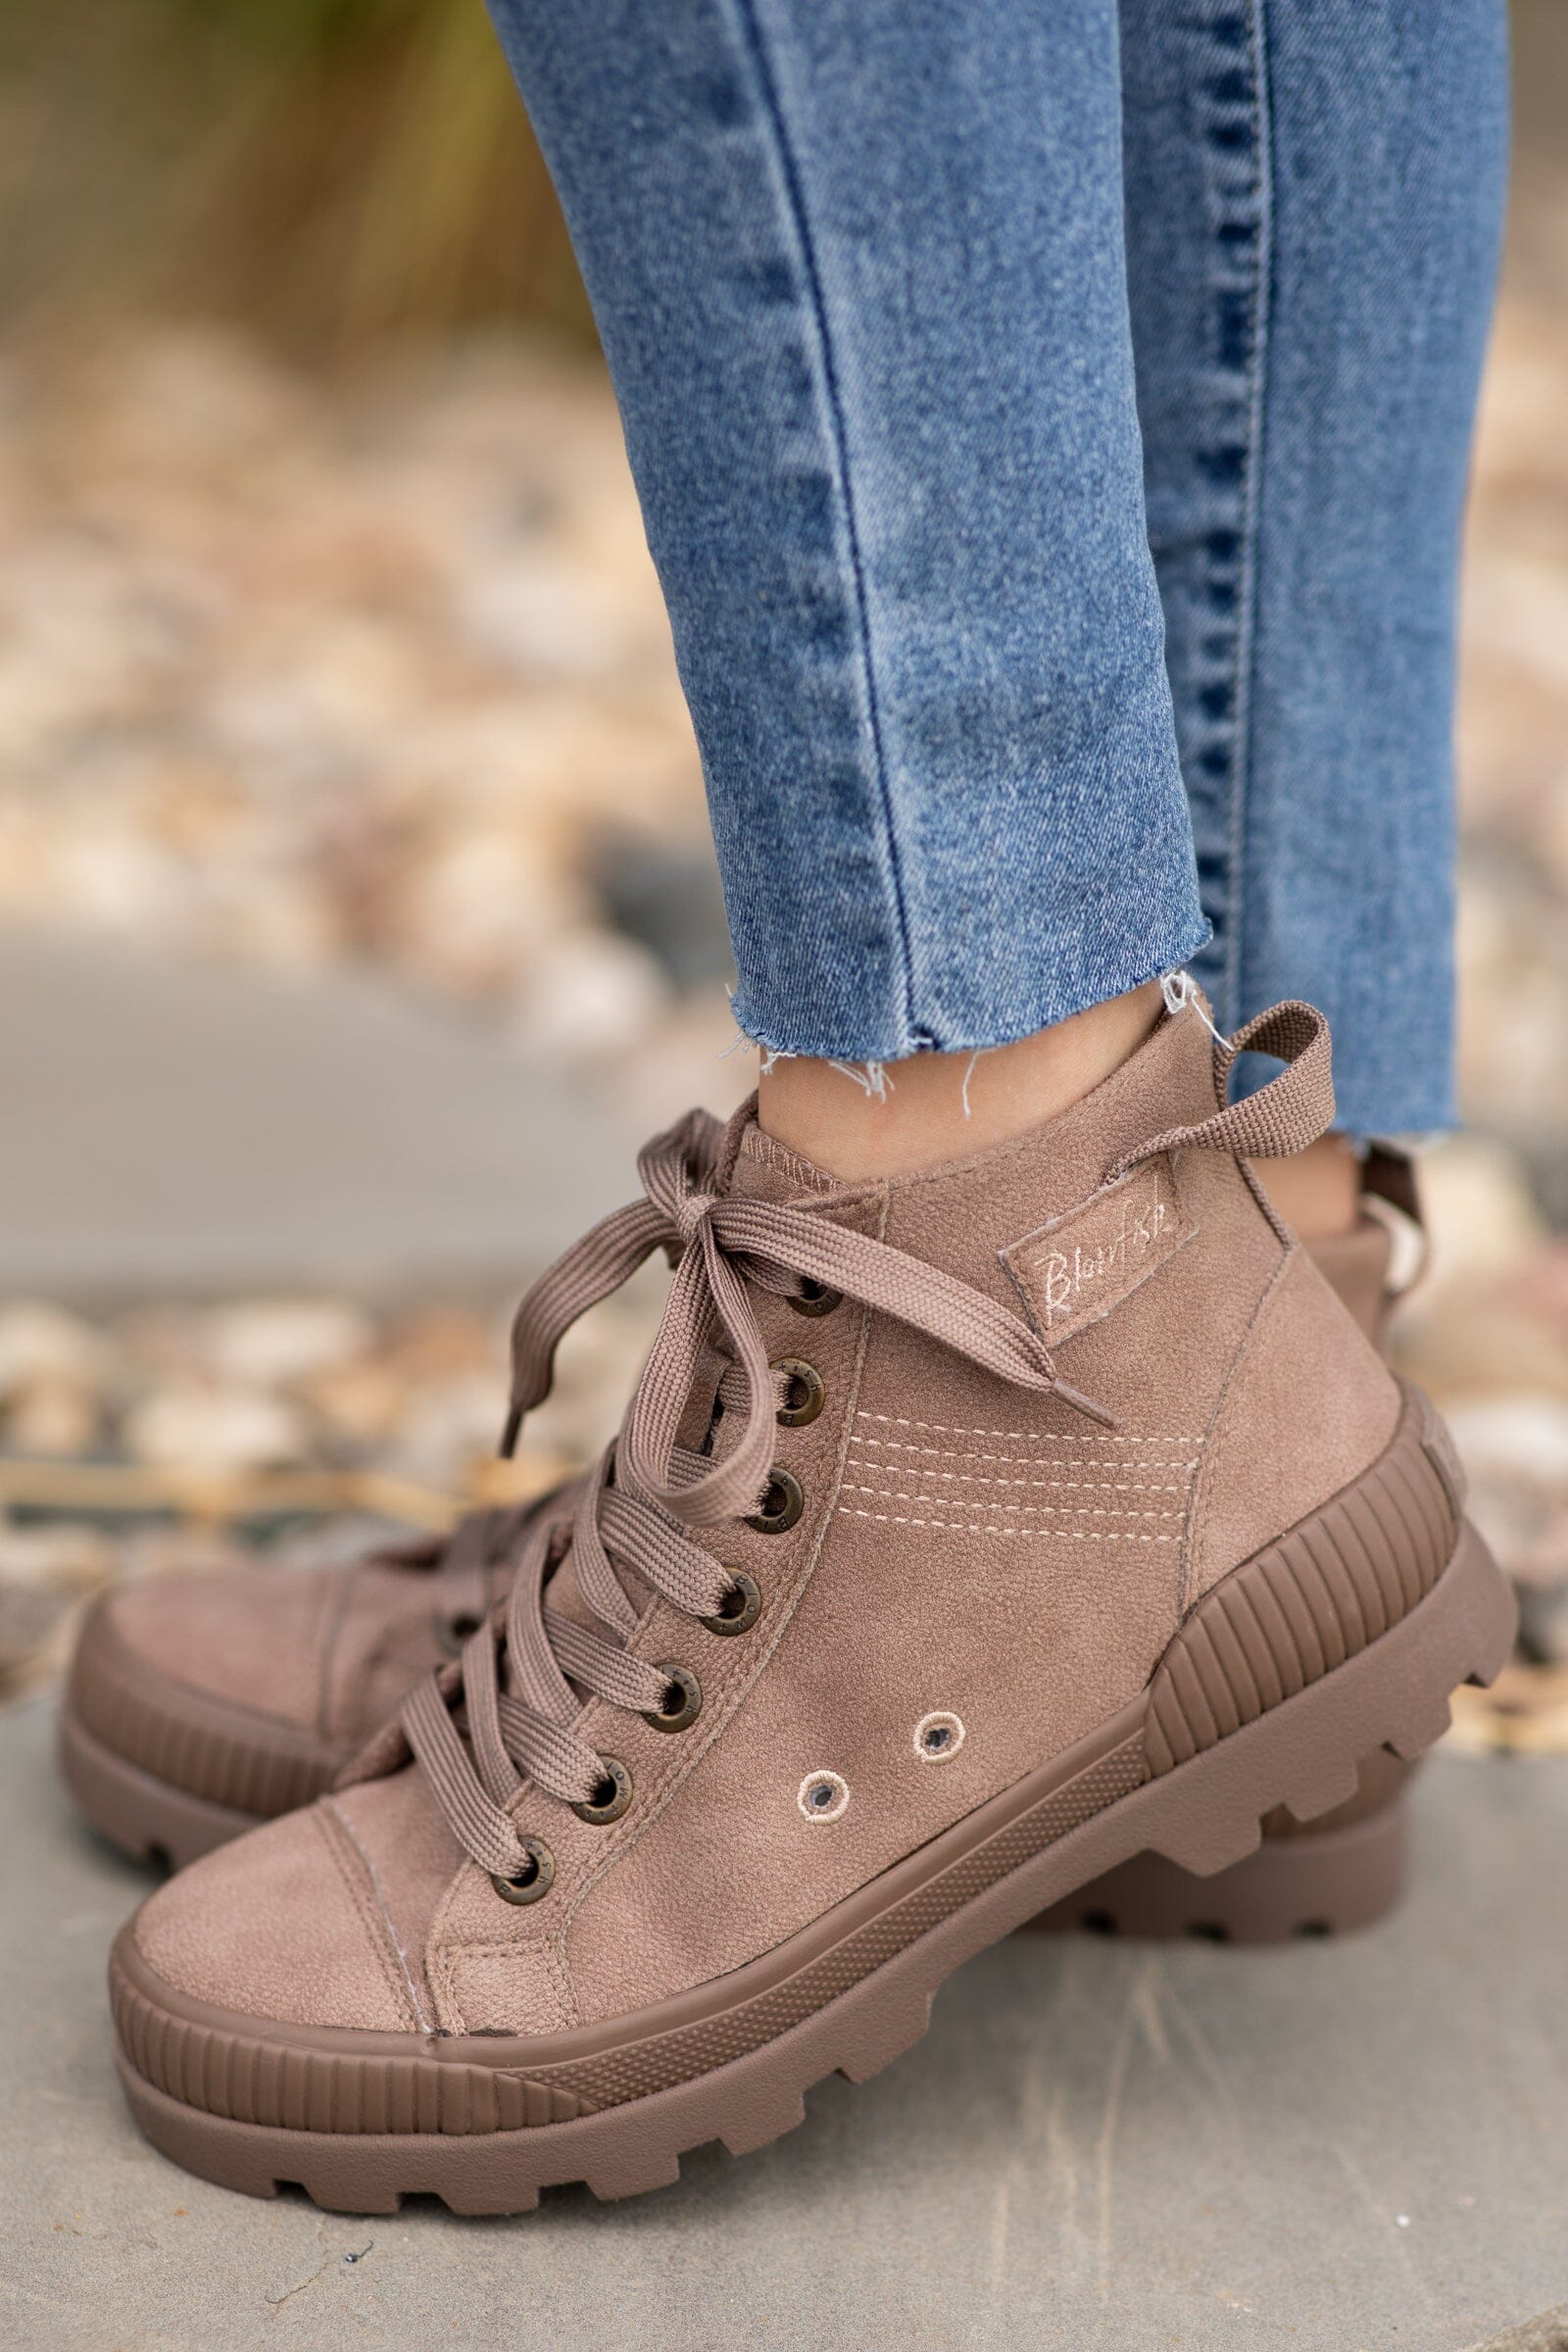 Mocha High Top Lug Sole Sneakers - Filly Flair